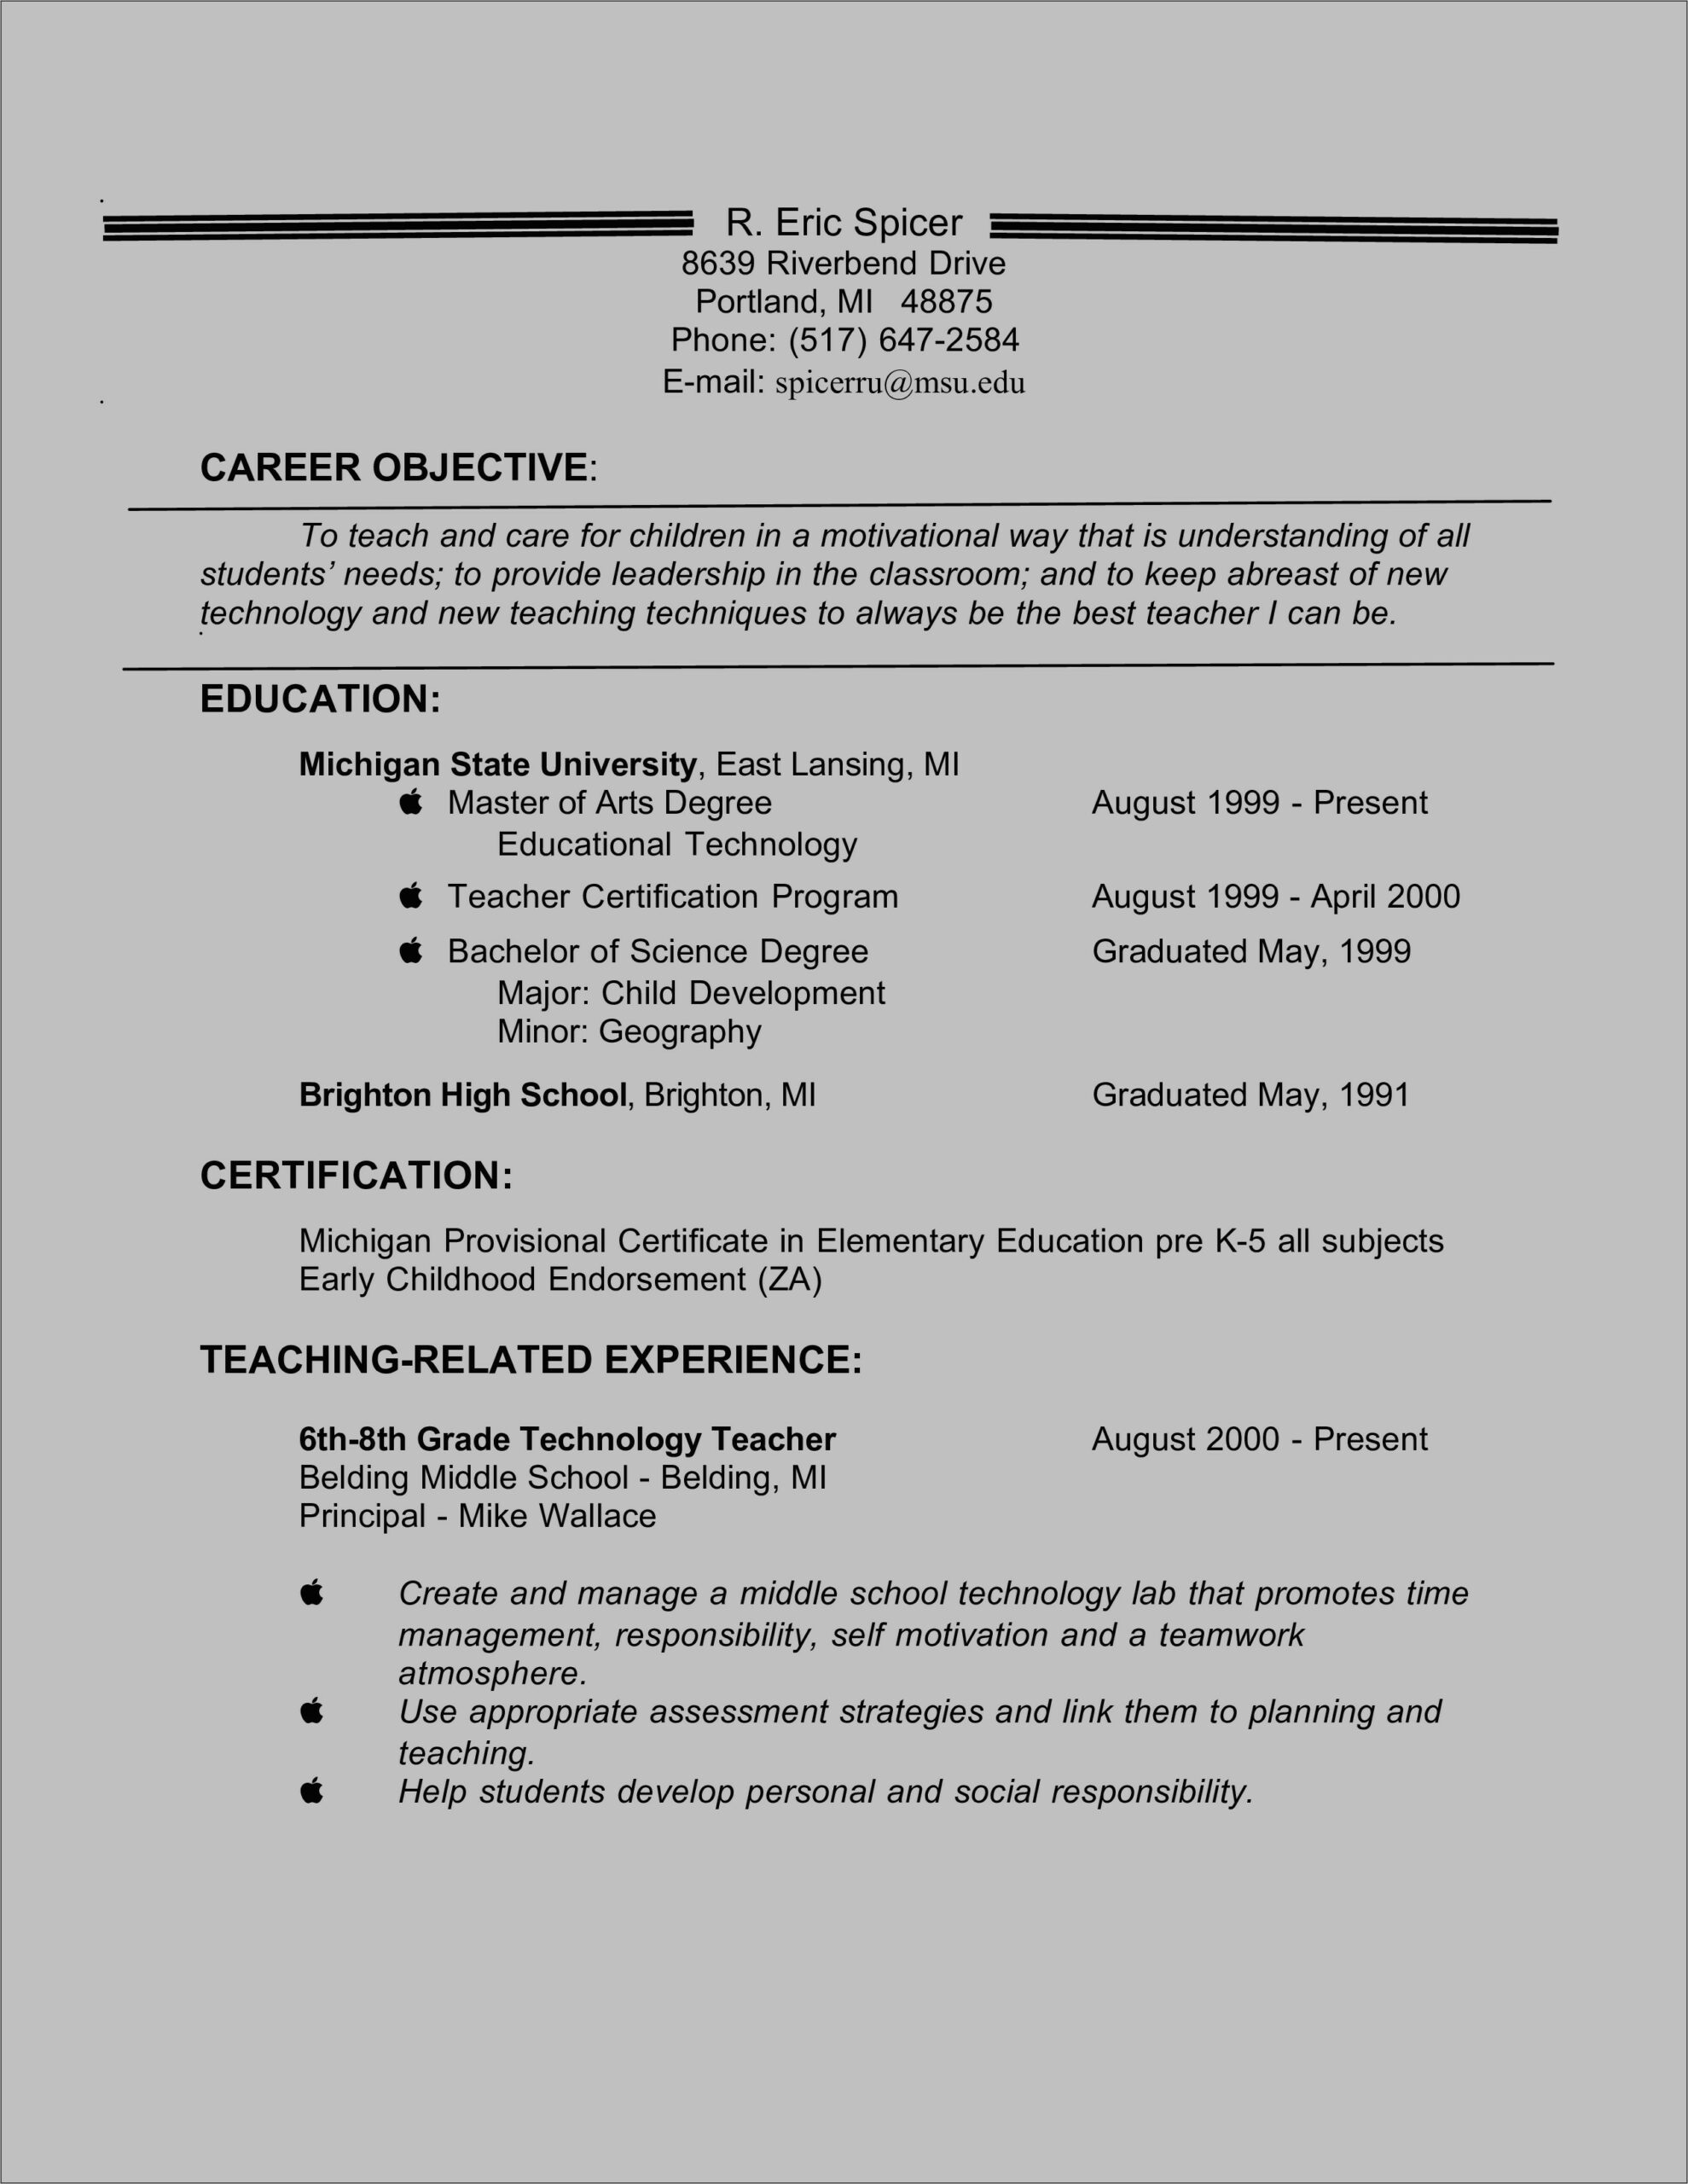 Example Resume For Teachers Objective